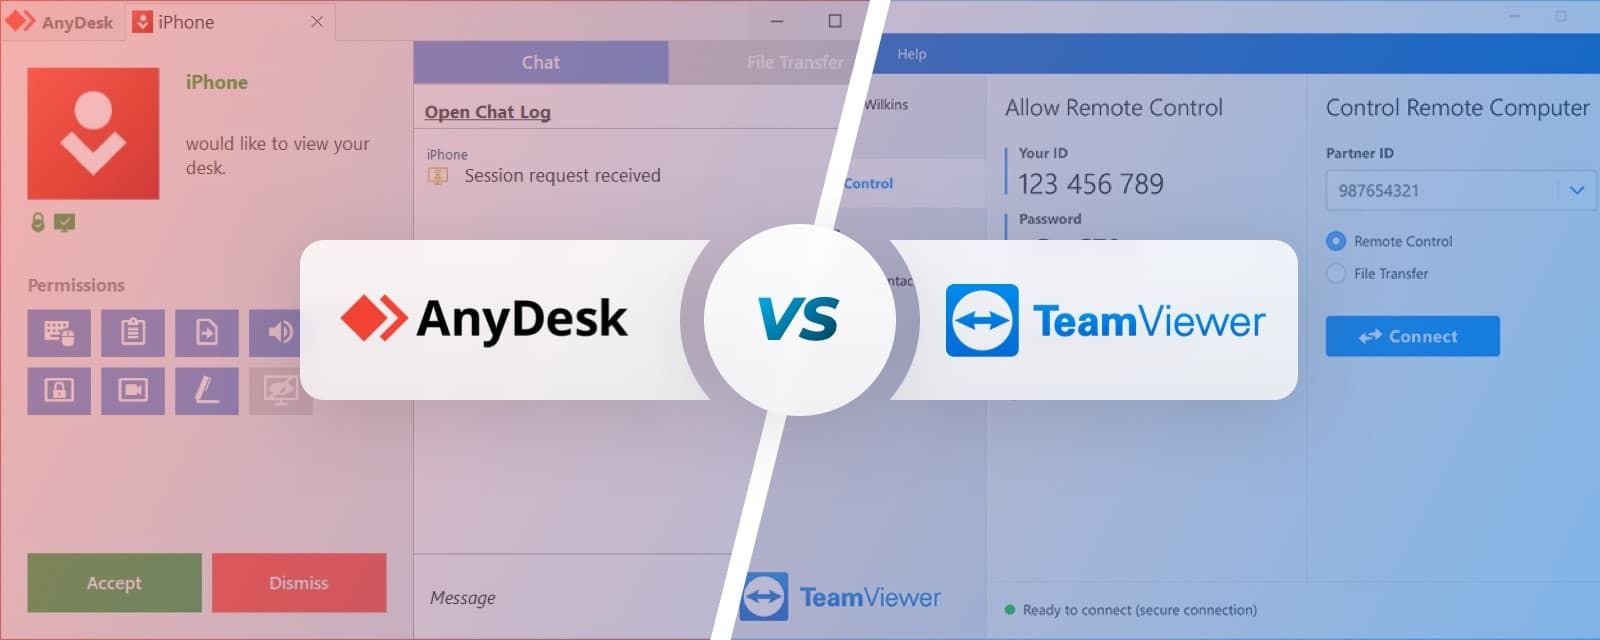 TeamViewer: A popular and reliable remote desktop tool that allows you to access your computer from anywhere.
AnyDesk: A lightweight and fast remote desktop tool that offers high-quality video and audio transmission.